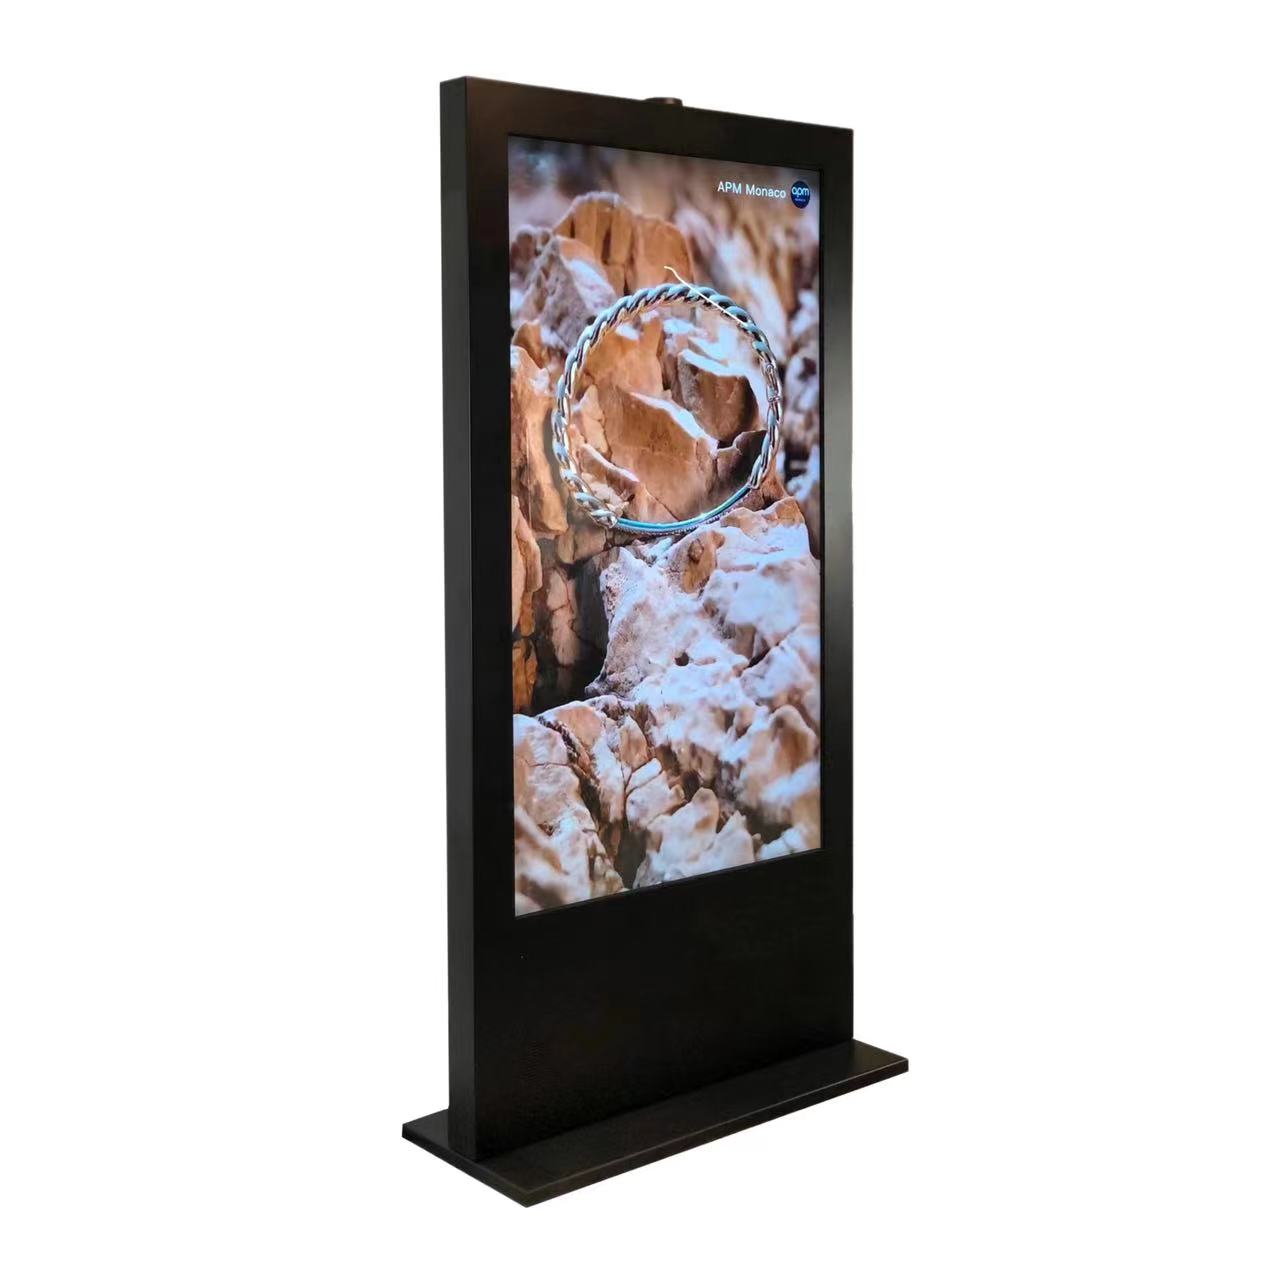 What is the advantages of 65inch indoor totem?